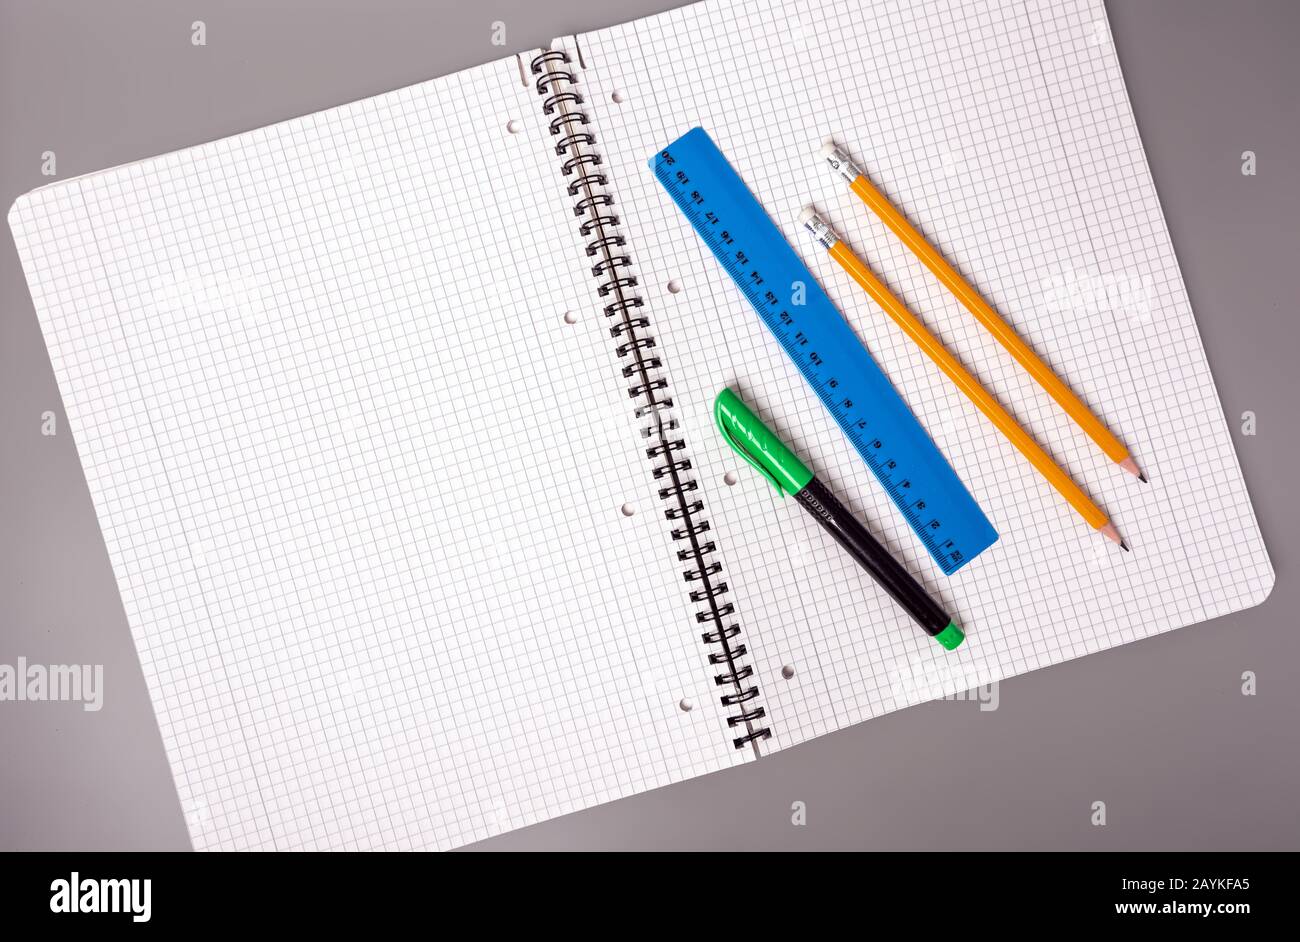 Pencils, pen and ruler are on an open notebook. Office. School supplies. Stock Photo